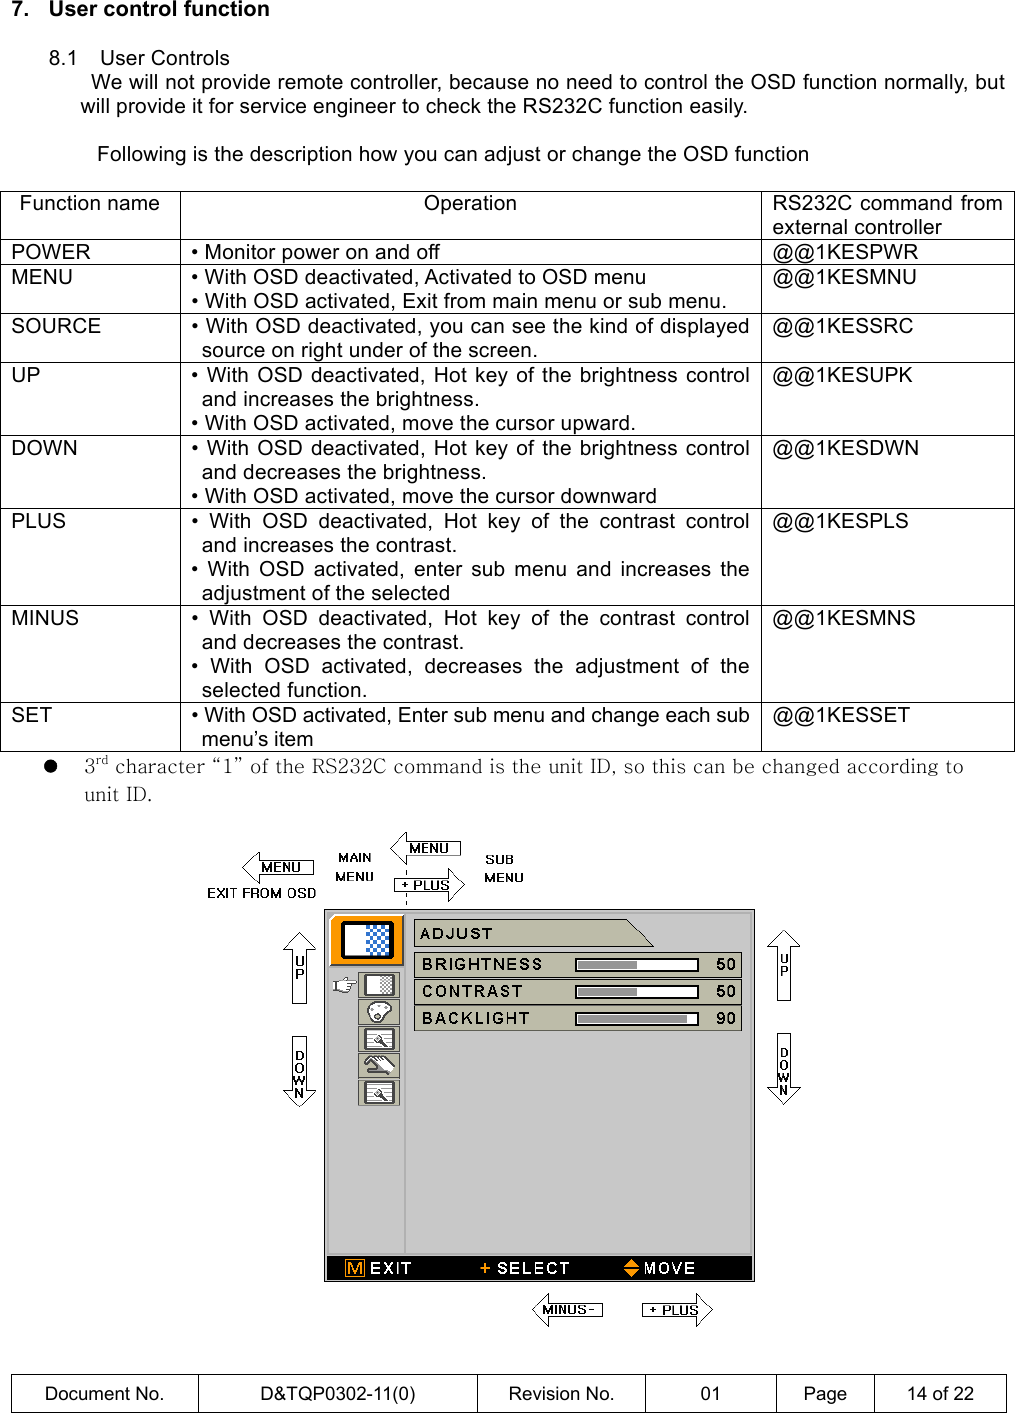  Document No.  D&amp;TQP0302-11(0)  Revision No.  01  Page  14 of 22  7.  User control function    8.1  User Controls  We will not provide remote controller, because no need to control the OSD function normally, but will provide it for service engineer to check the RS232C function easily.    Following is the description how you can adjust or change the OSD function  Function name  Operation  RS232C command from external controller POWER  • Monitor power on and off  @@1KESPWR MENU  • With OSD deactivated, Activated to OSD menu • With OSD activated, Exit from main menu or sub menu. @@1KESMNU SOURCE  • With OSD deactivated, you can see the kind of displayed source on right under of the screen. @@1KESSRC UP  • With OSD deactivated, Hot key of the brightness control and increases the brightness. • With OSD activated, move the cursor upward. @@1KESUPK DOWN  • With OSD deactivated, Hot key of the brightness control and decreases the brightness. • With OSD activated, move the cursor downward @@1KESDWN PLUS  • With OSD deactivated, Hot key of the contrast control and increases the contrast. • With OSD activated, enter sub menu and increases the adjustment of the selected   @@1KESPLS MINUS  • With OSD deactivated, Hot key of the contrast control and decreases the contrast. • With OSD activated, decreases the adjustment of the selected function. @@1KESMNS SET  • With OSD activated, Enter sub menu and change each sub menu’s item @@1KESSET z 3rd character “1” of the RS232C command is the unit ID, so this can be changed according to unit ID.   